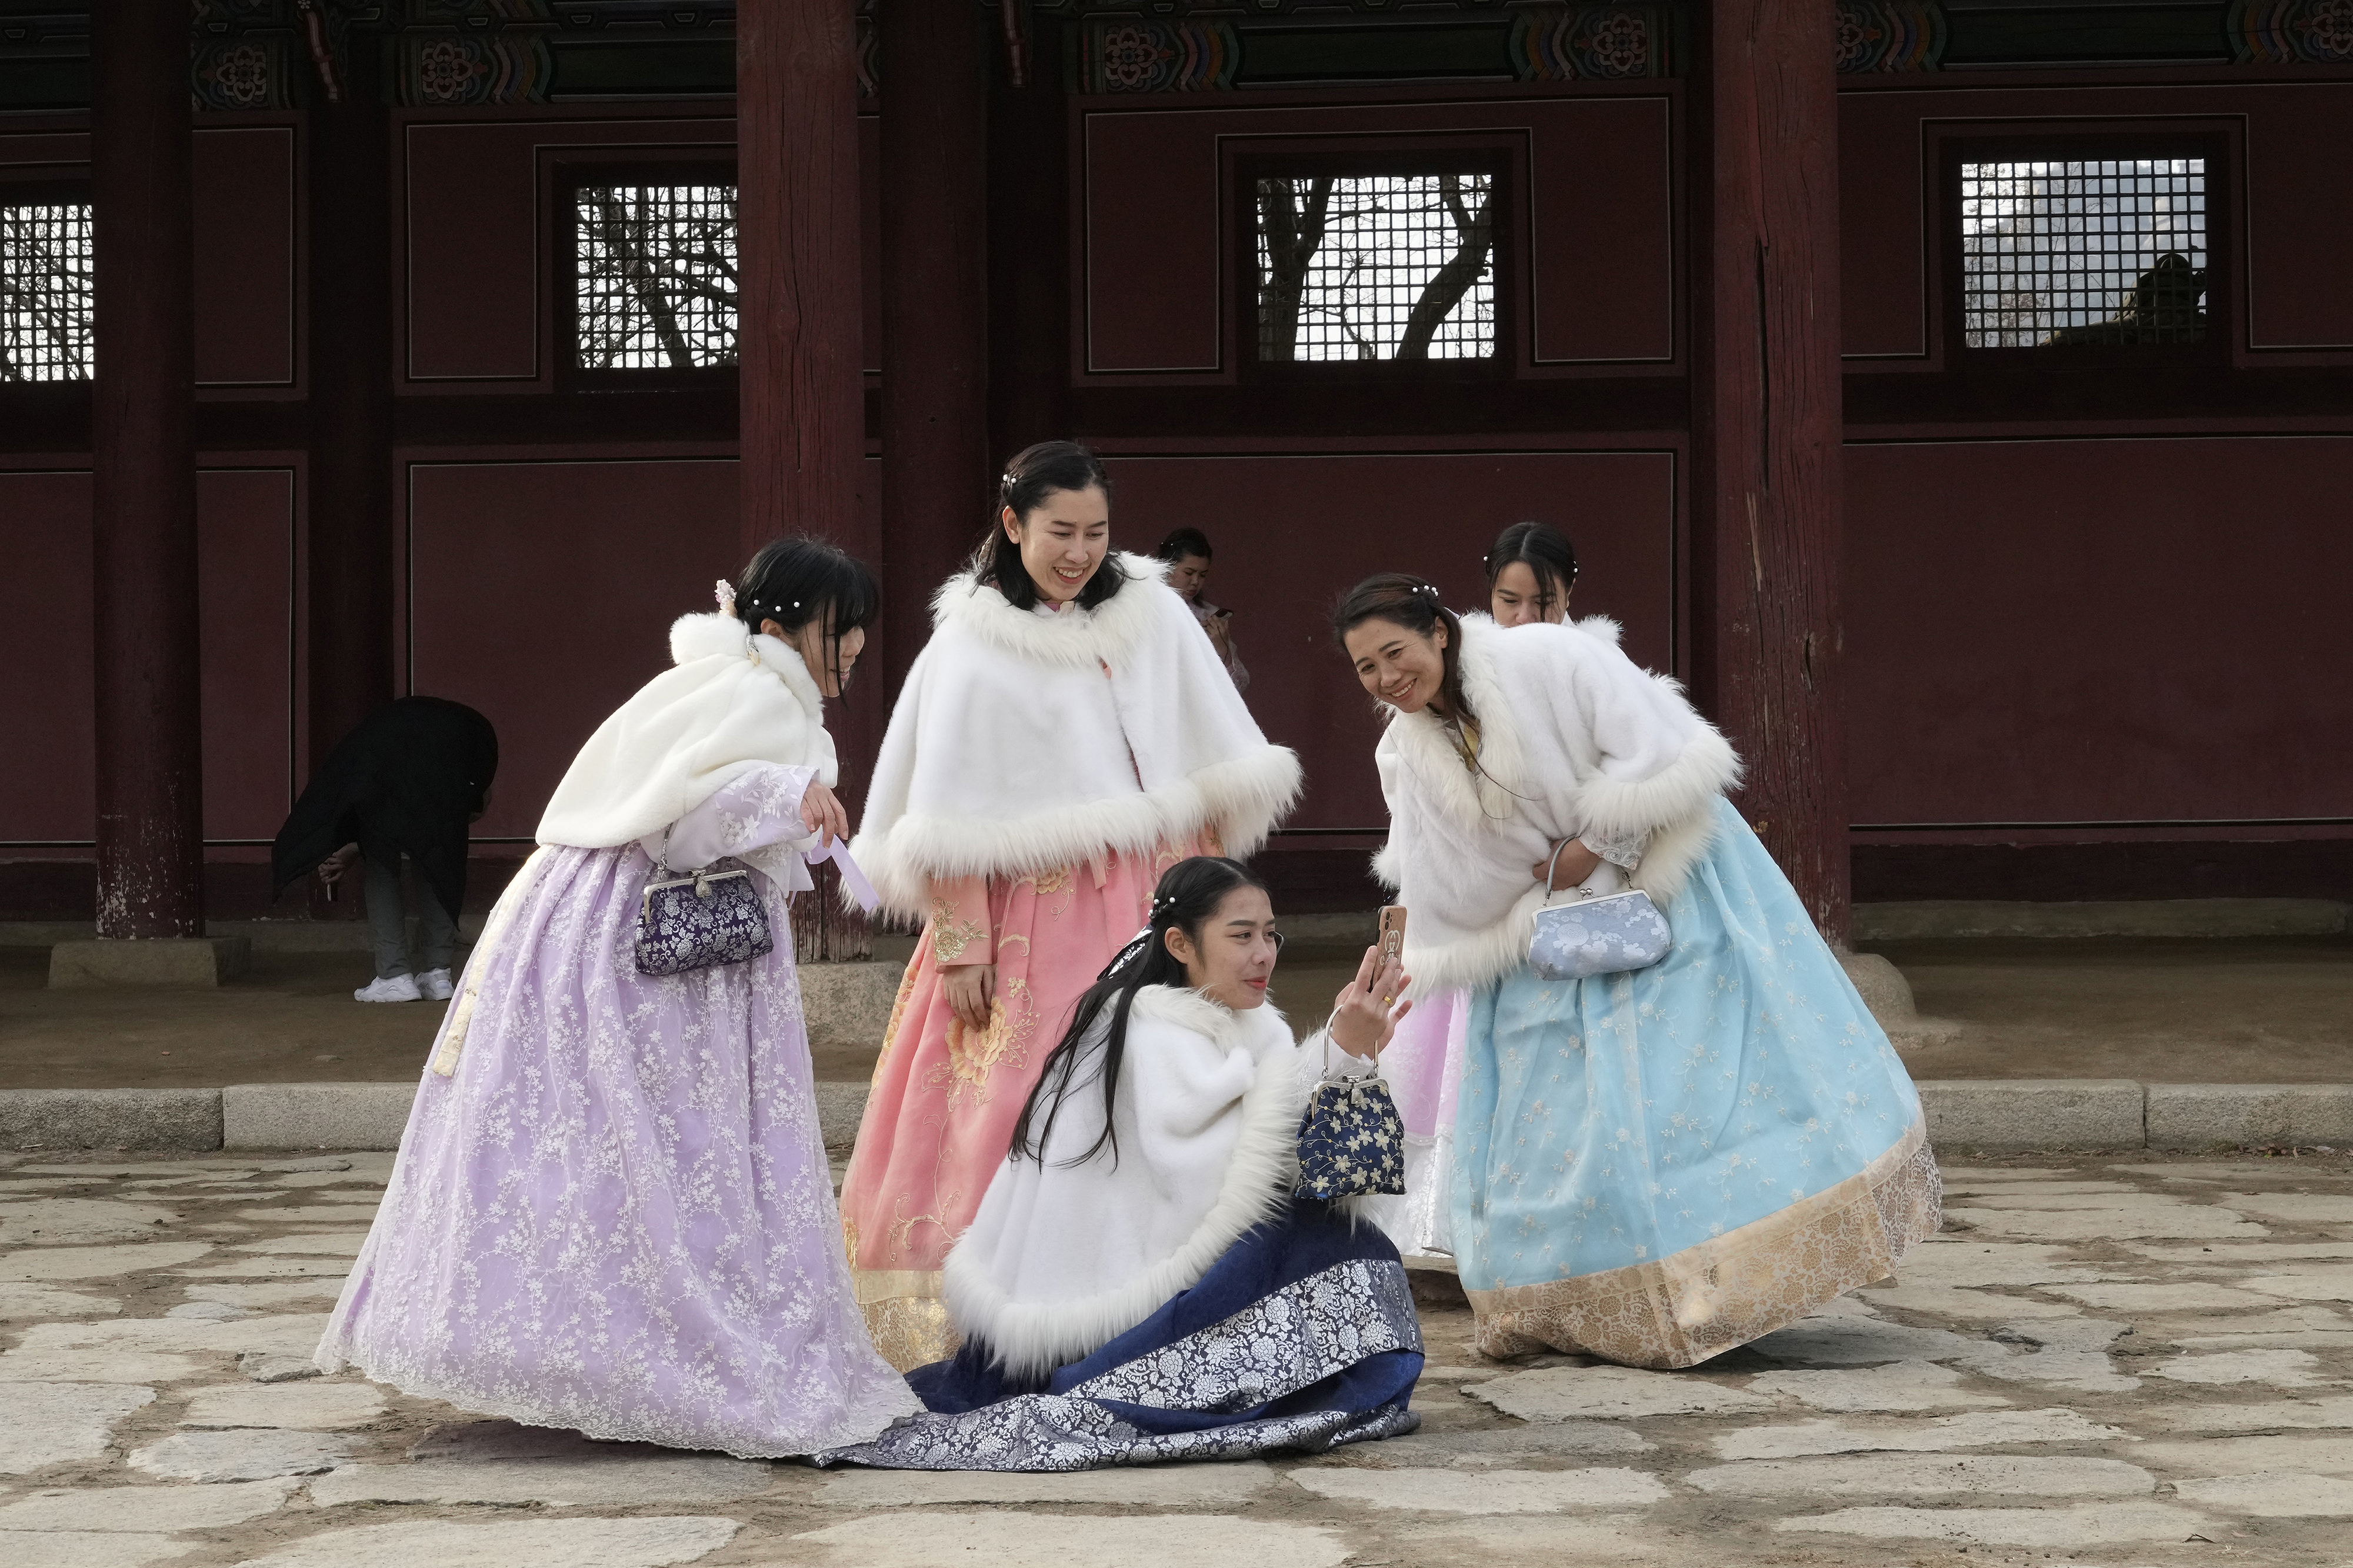 People in traditional hanbok attire look at a cell phone during their visit to celebrate Lunar New Year at Gyeongbok Palace, which was the main royal palace of the Joseon Dynasty and one of South Korea's best-known landmarks, in Seoul, South Korea. South, on Sunday, Jan. 22, 2023. (AP Photo/Ahn Young-joon)